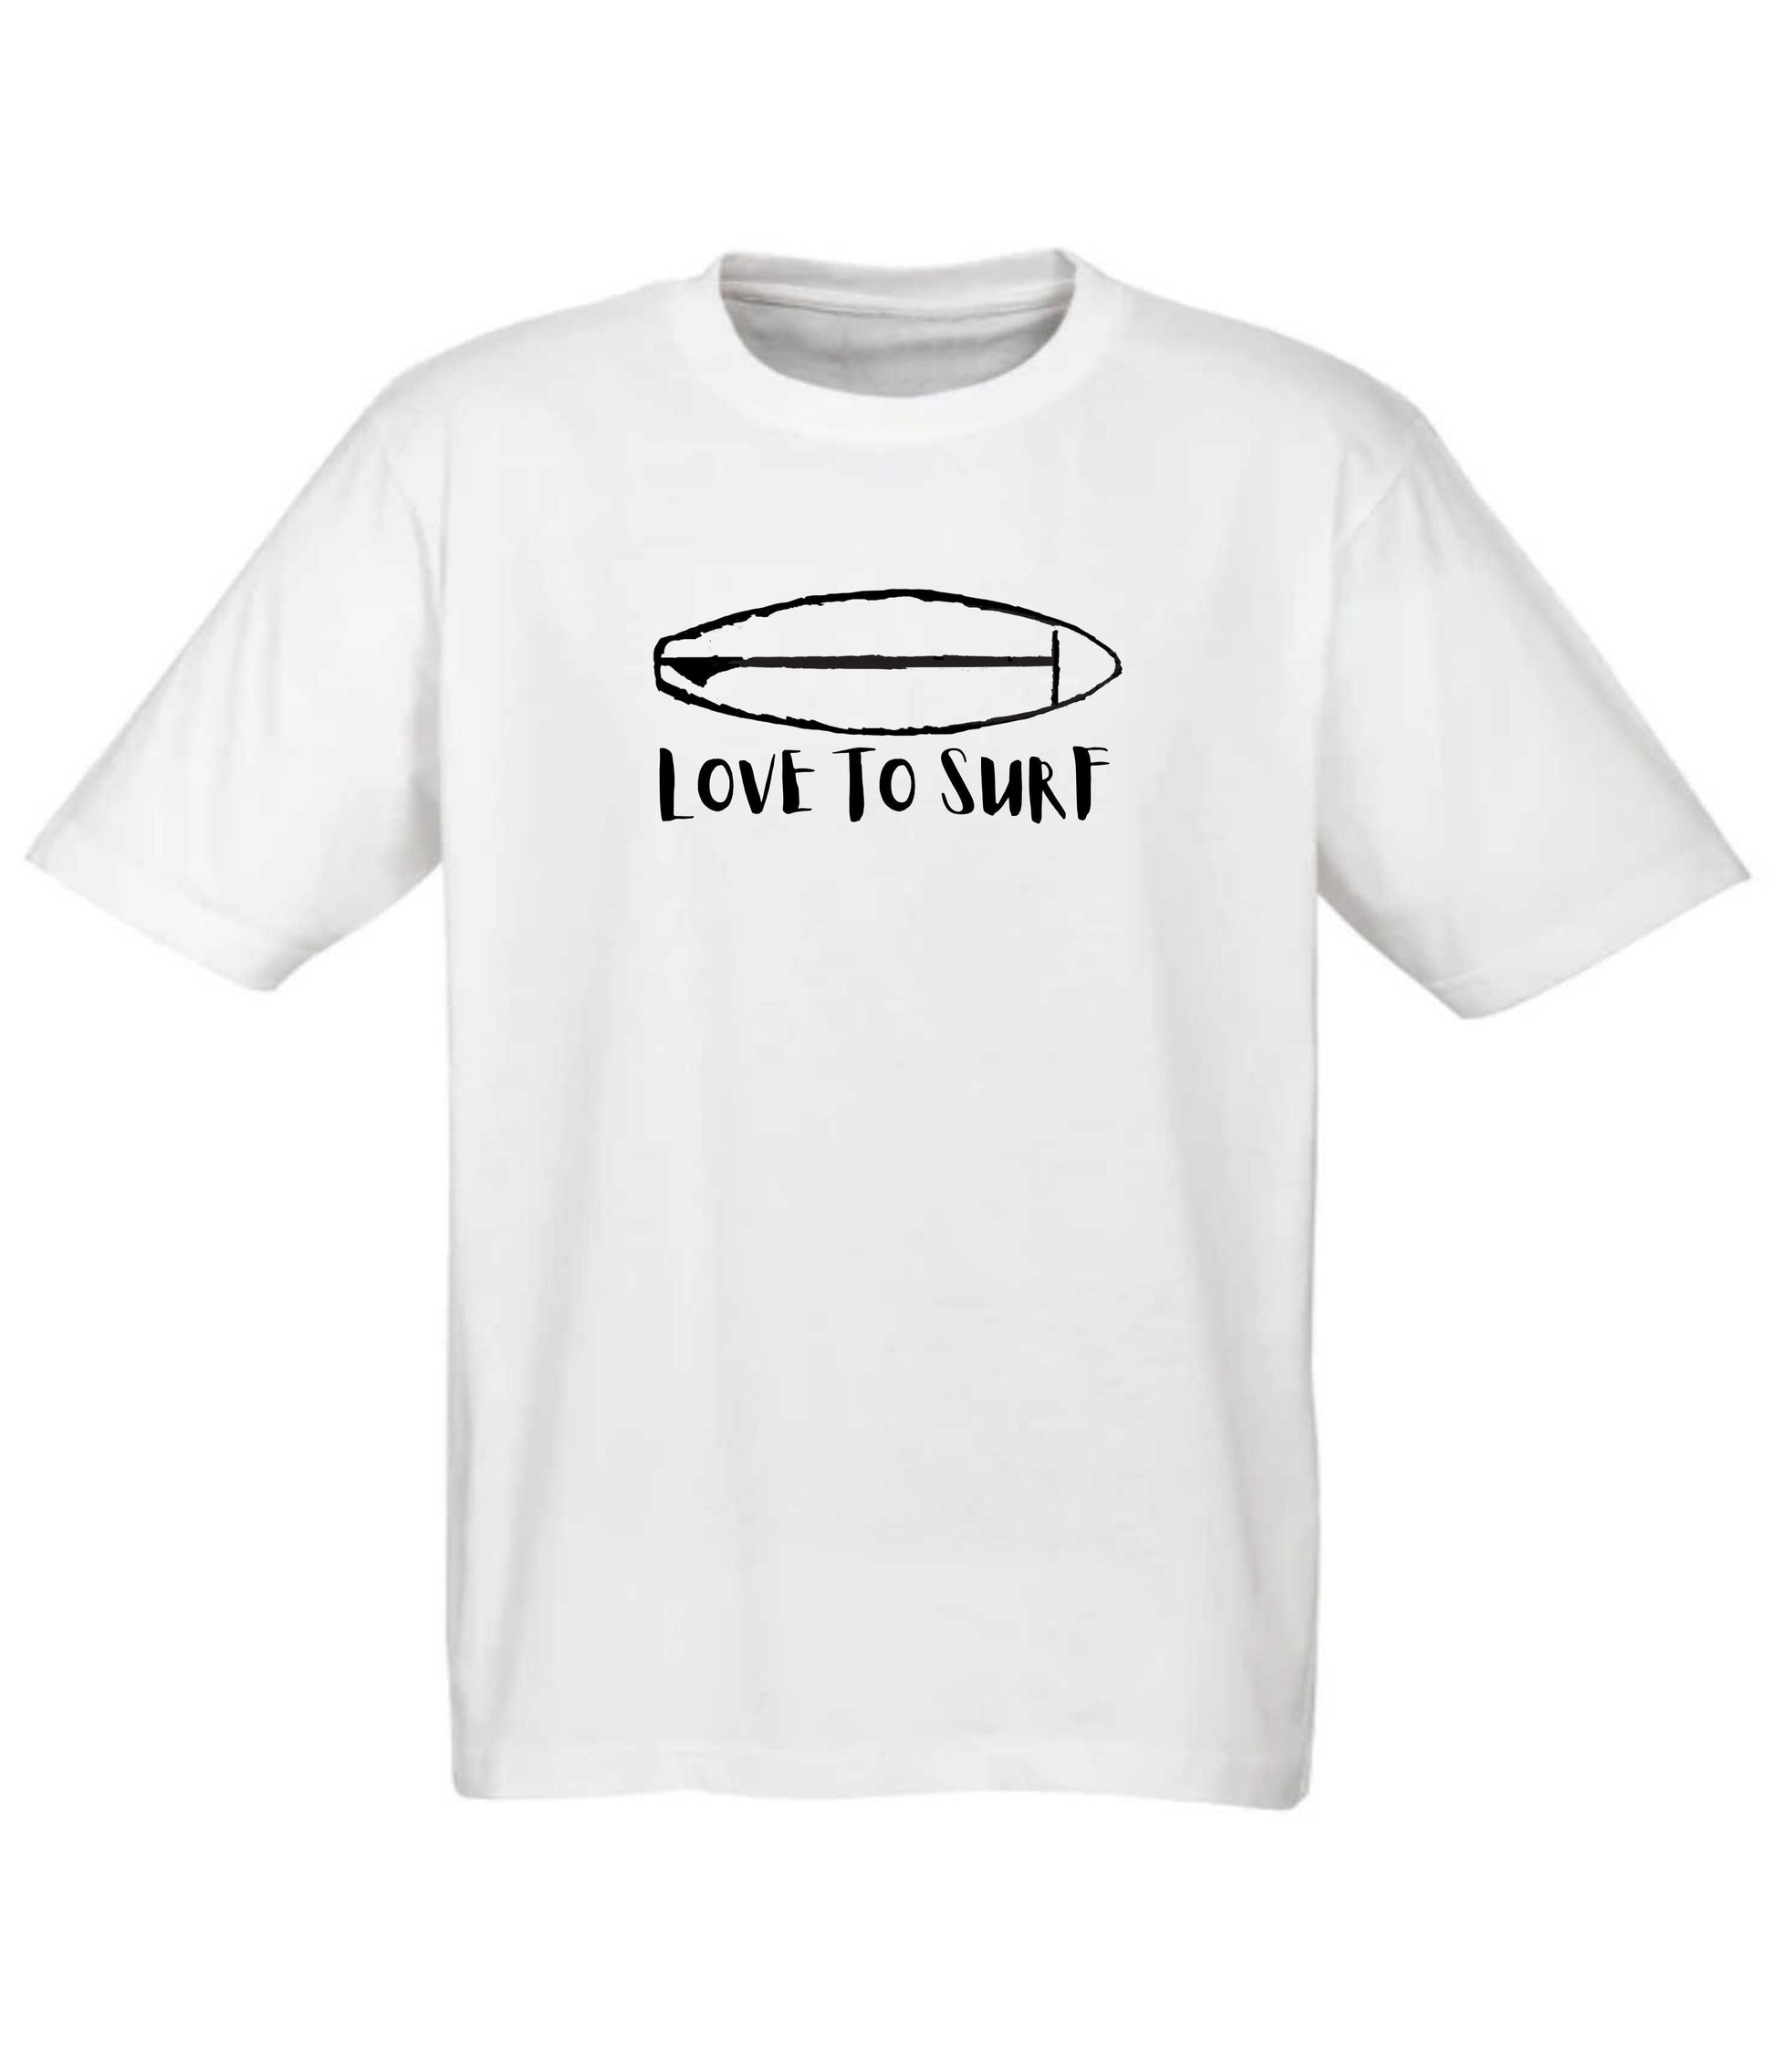 Tee - Love To Surf (White) - Frame 'n' Copy